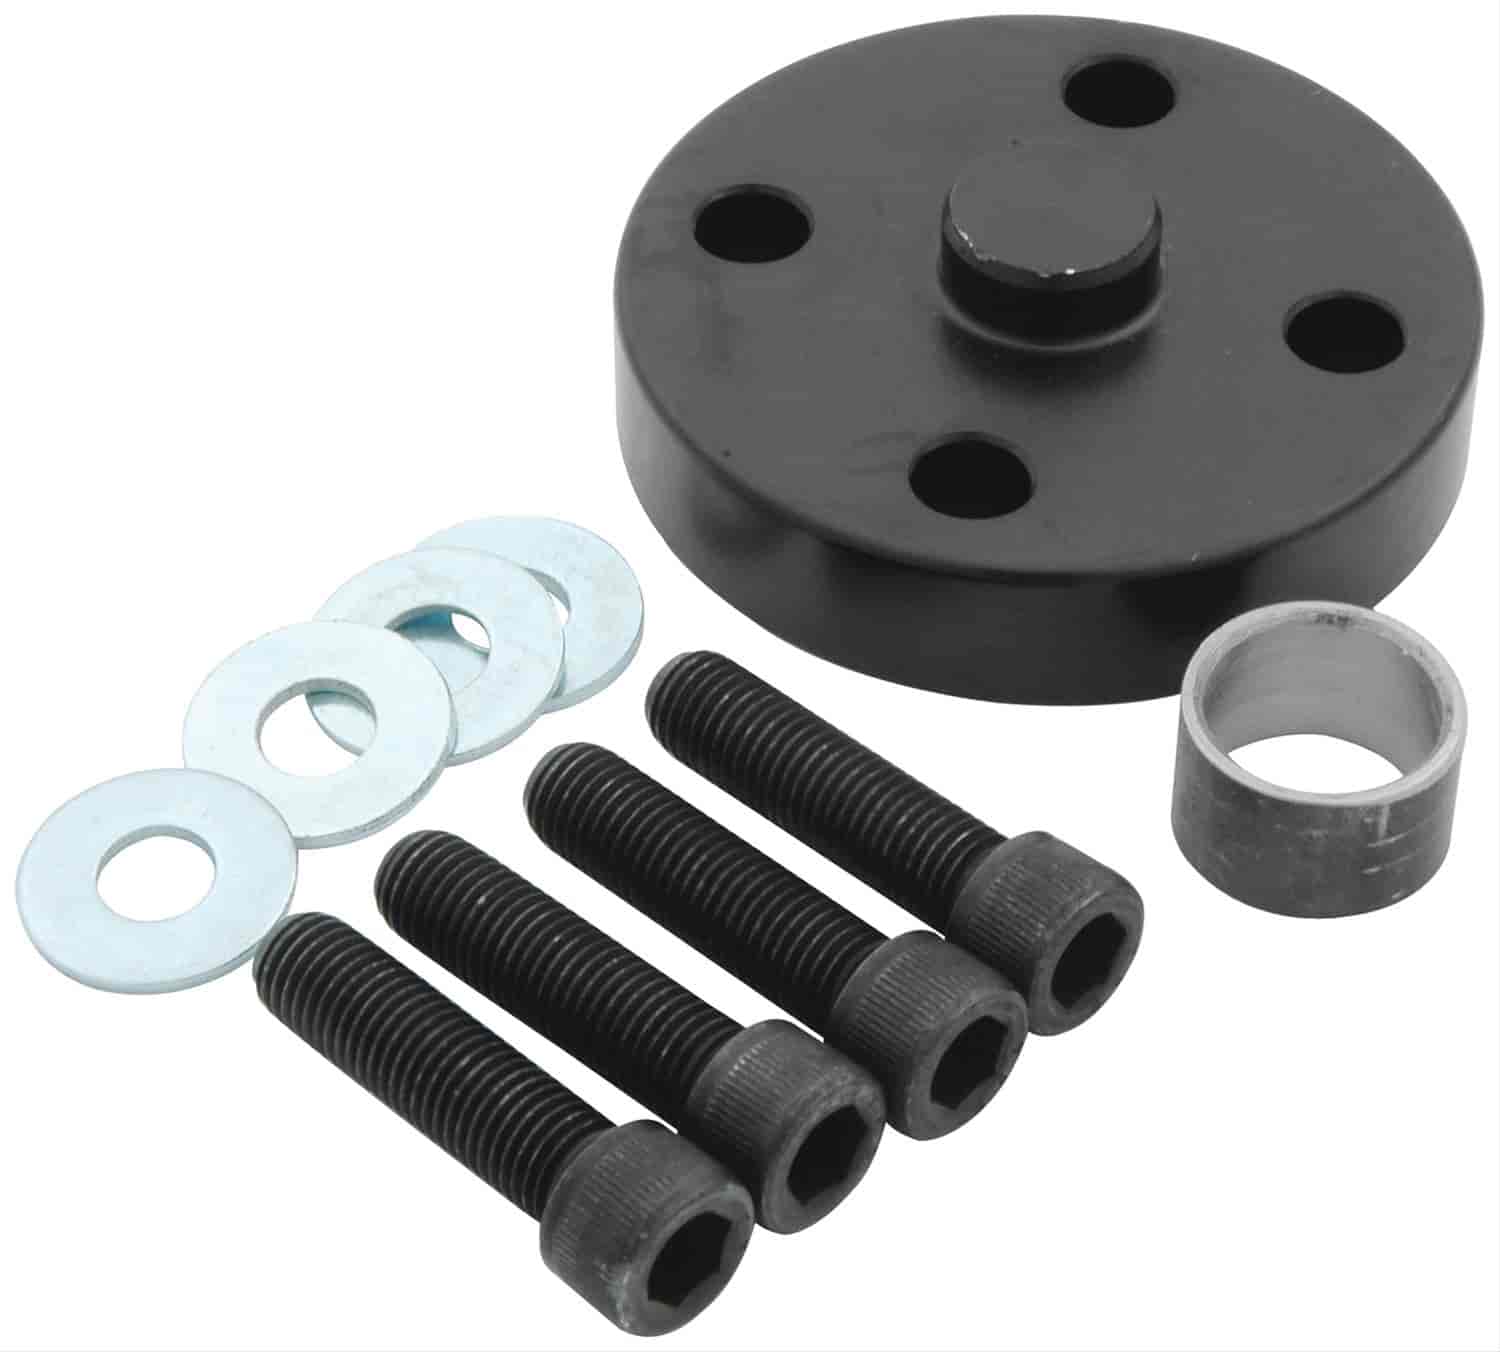 Aluminum Fan Spacer Kit 1/2" Spaced *Note: Spacers work with 1-3/4" bolt circle flanges only.